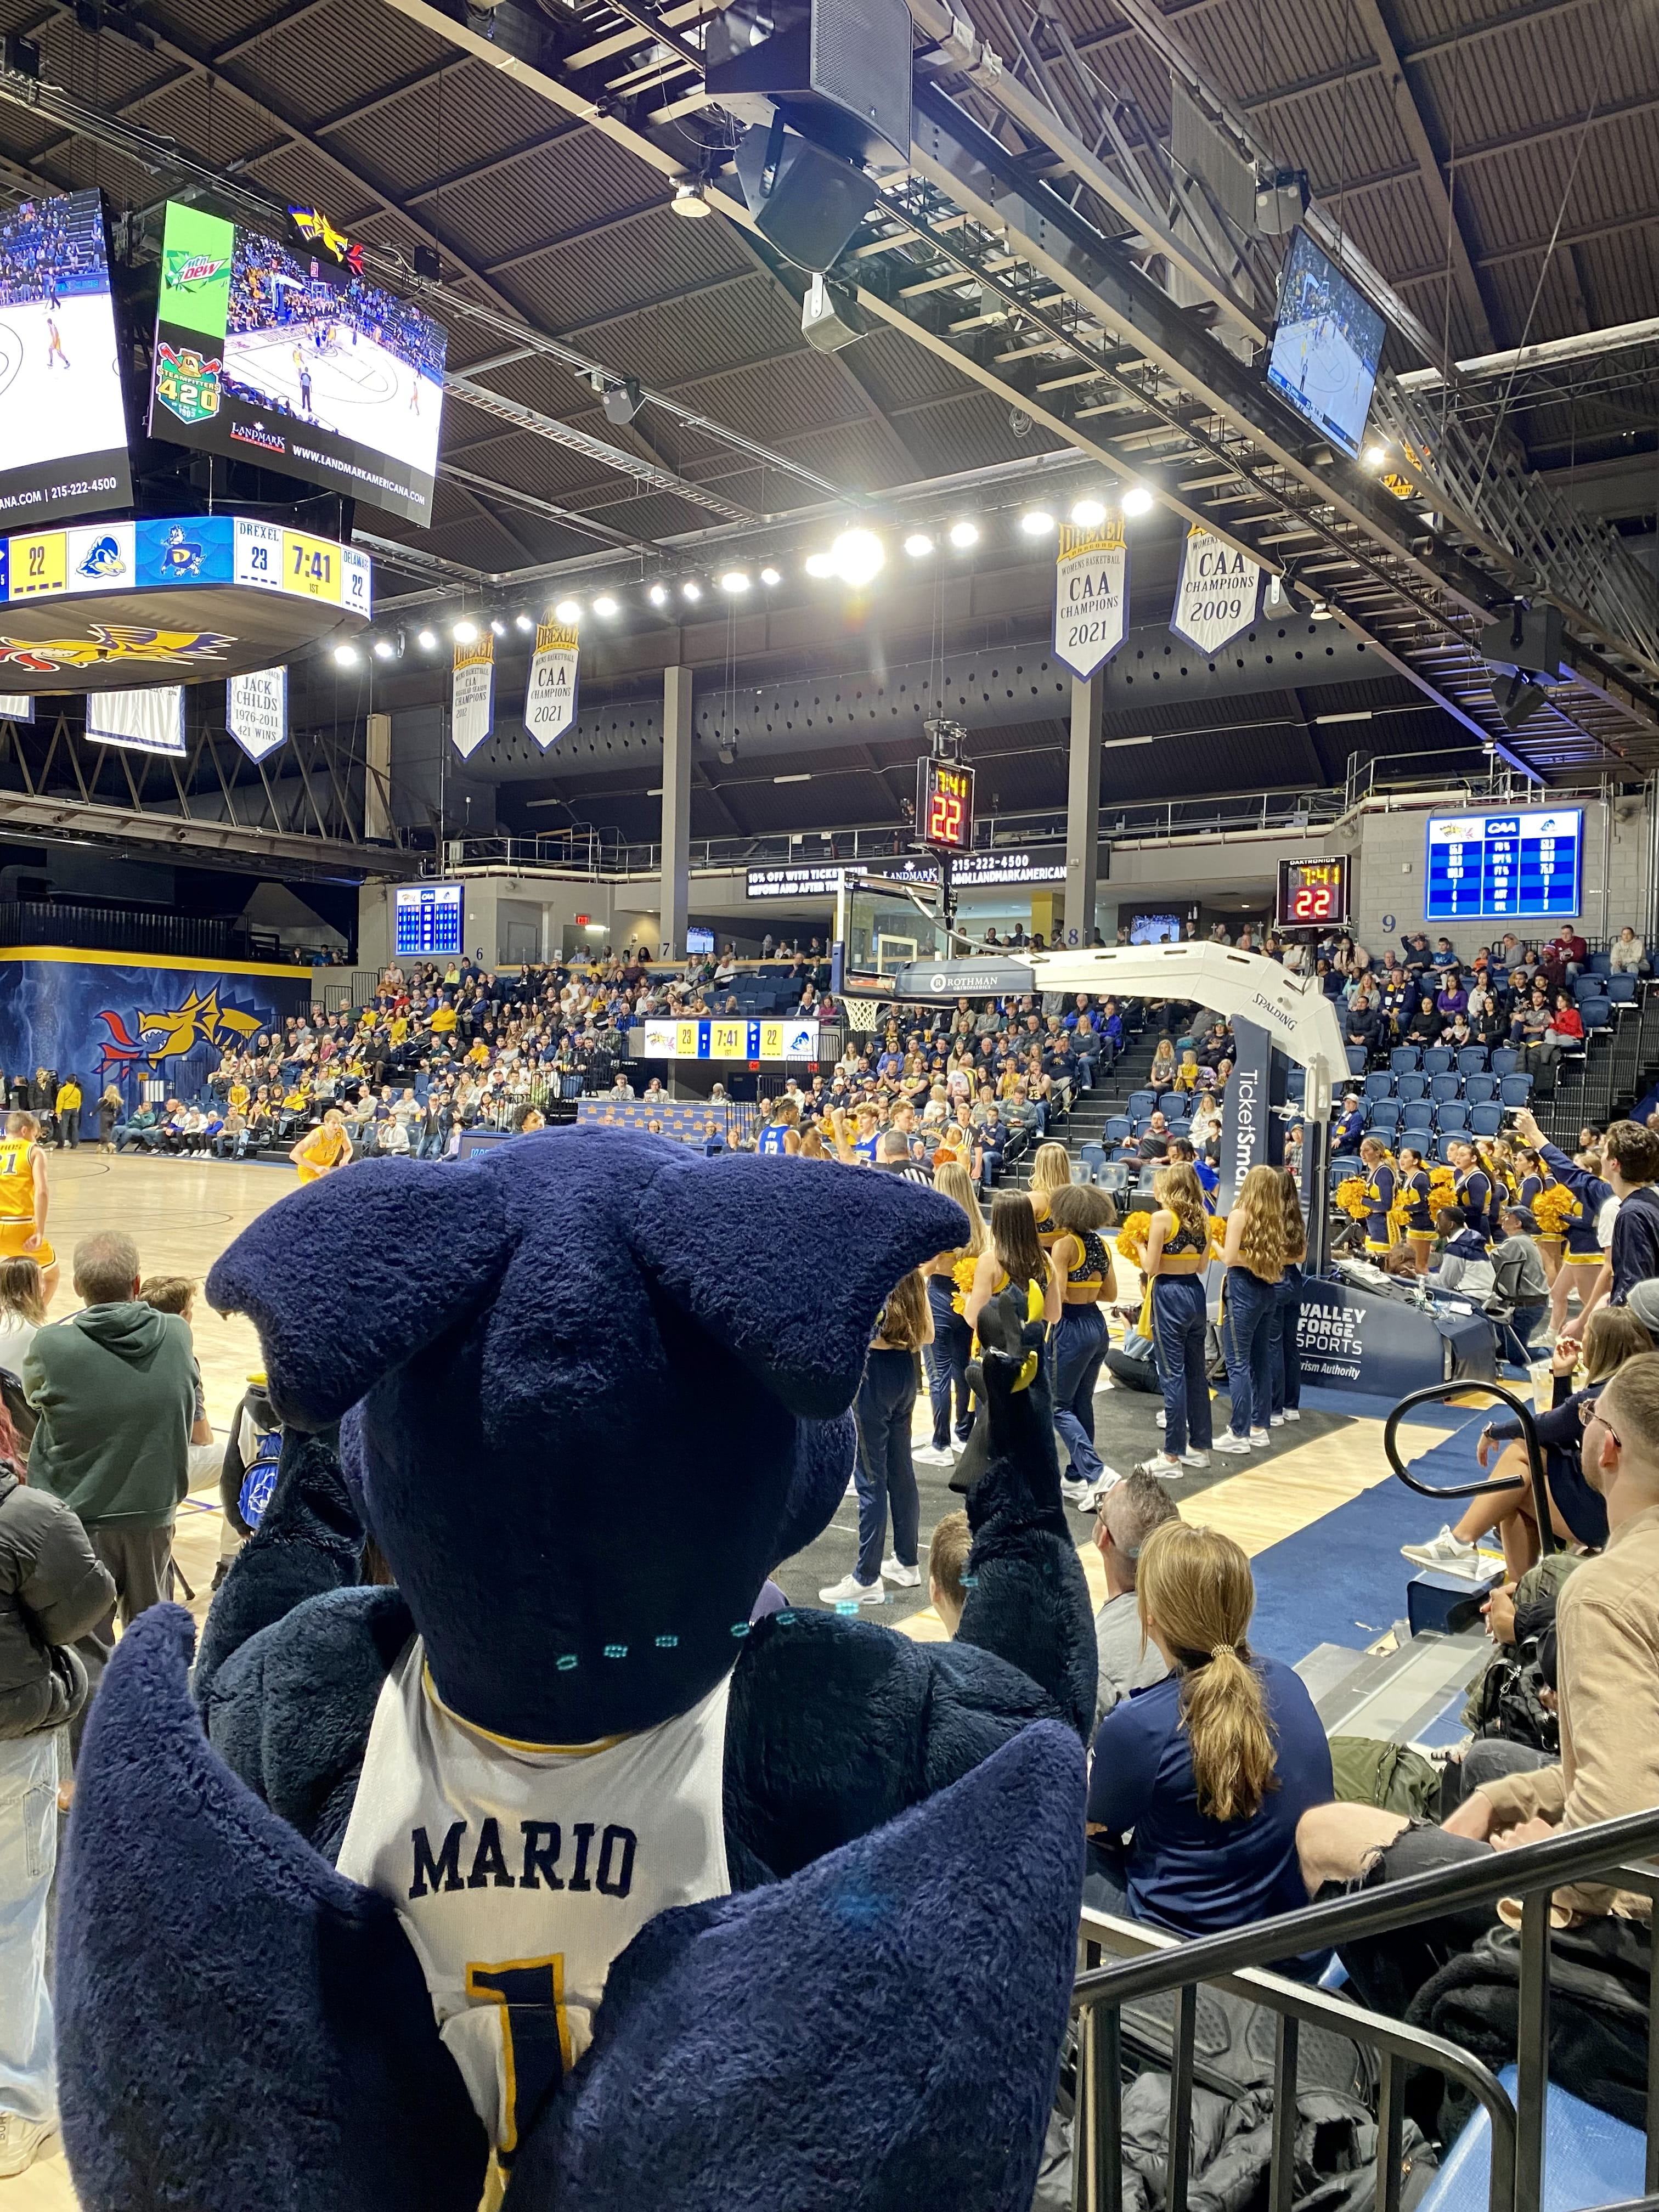 Mario watches the crowd at the DAC